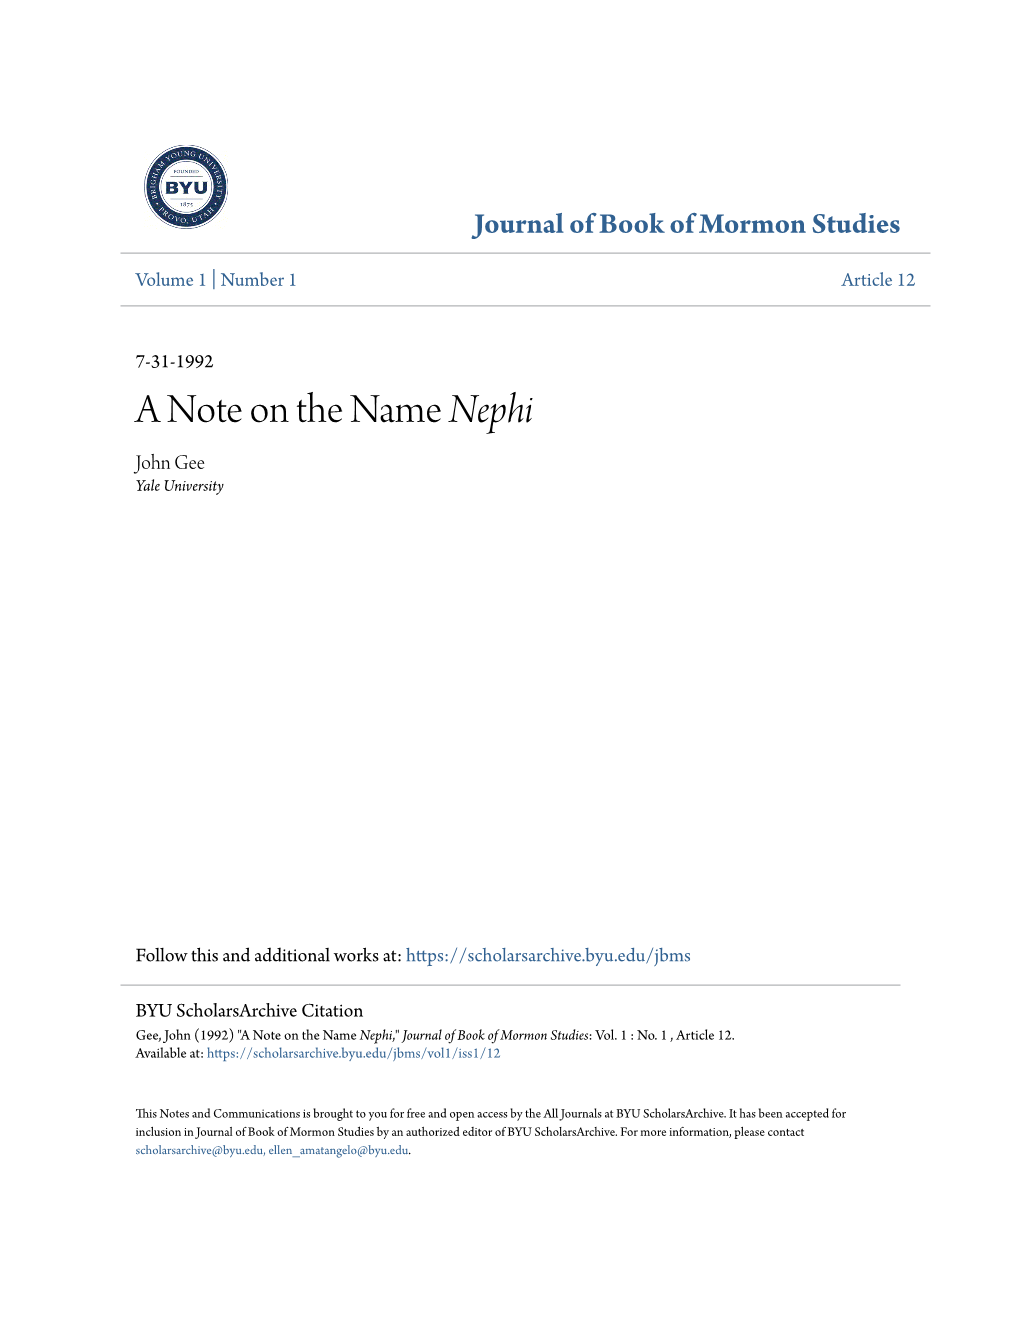 A Note on the Name &lt;I&gt;Nephi&lt;/I&gt;